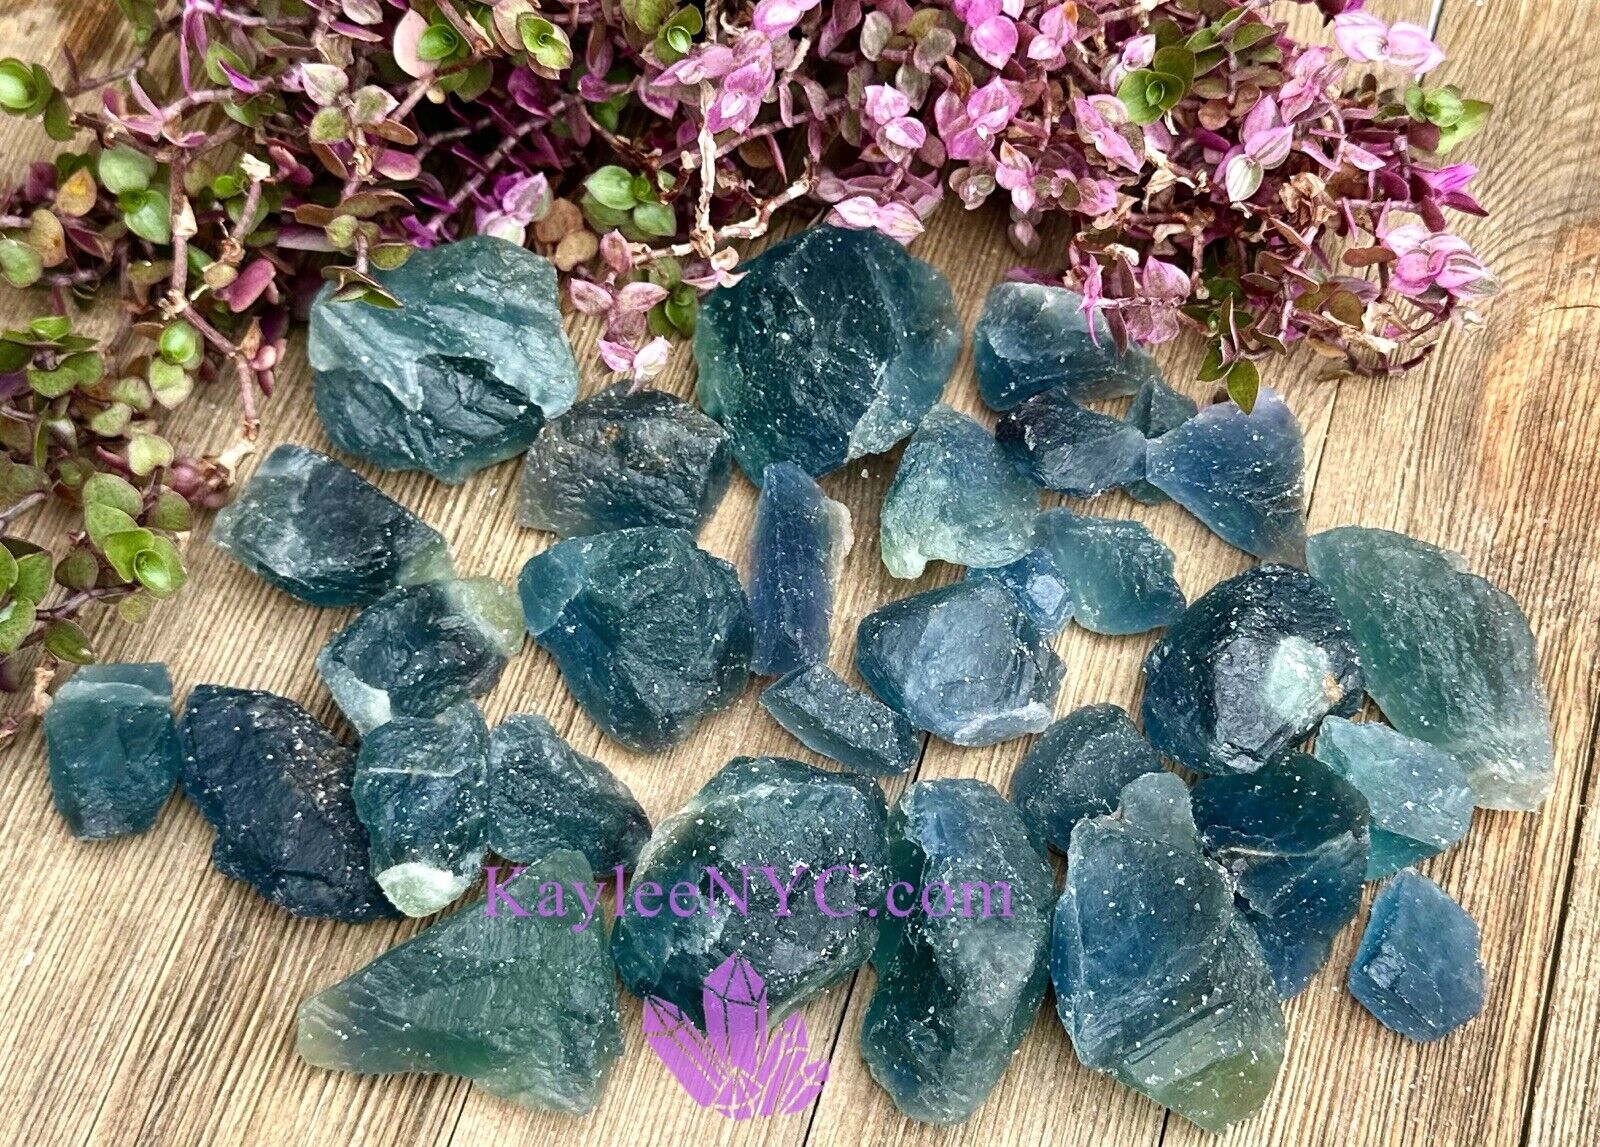 Wholesale Lot 2 Lbs Natural Blue Fluorite Raw Crystal Nice Quality